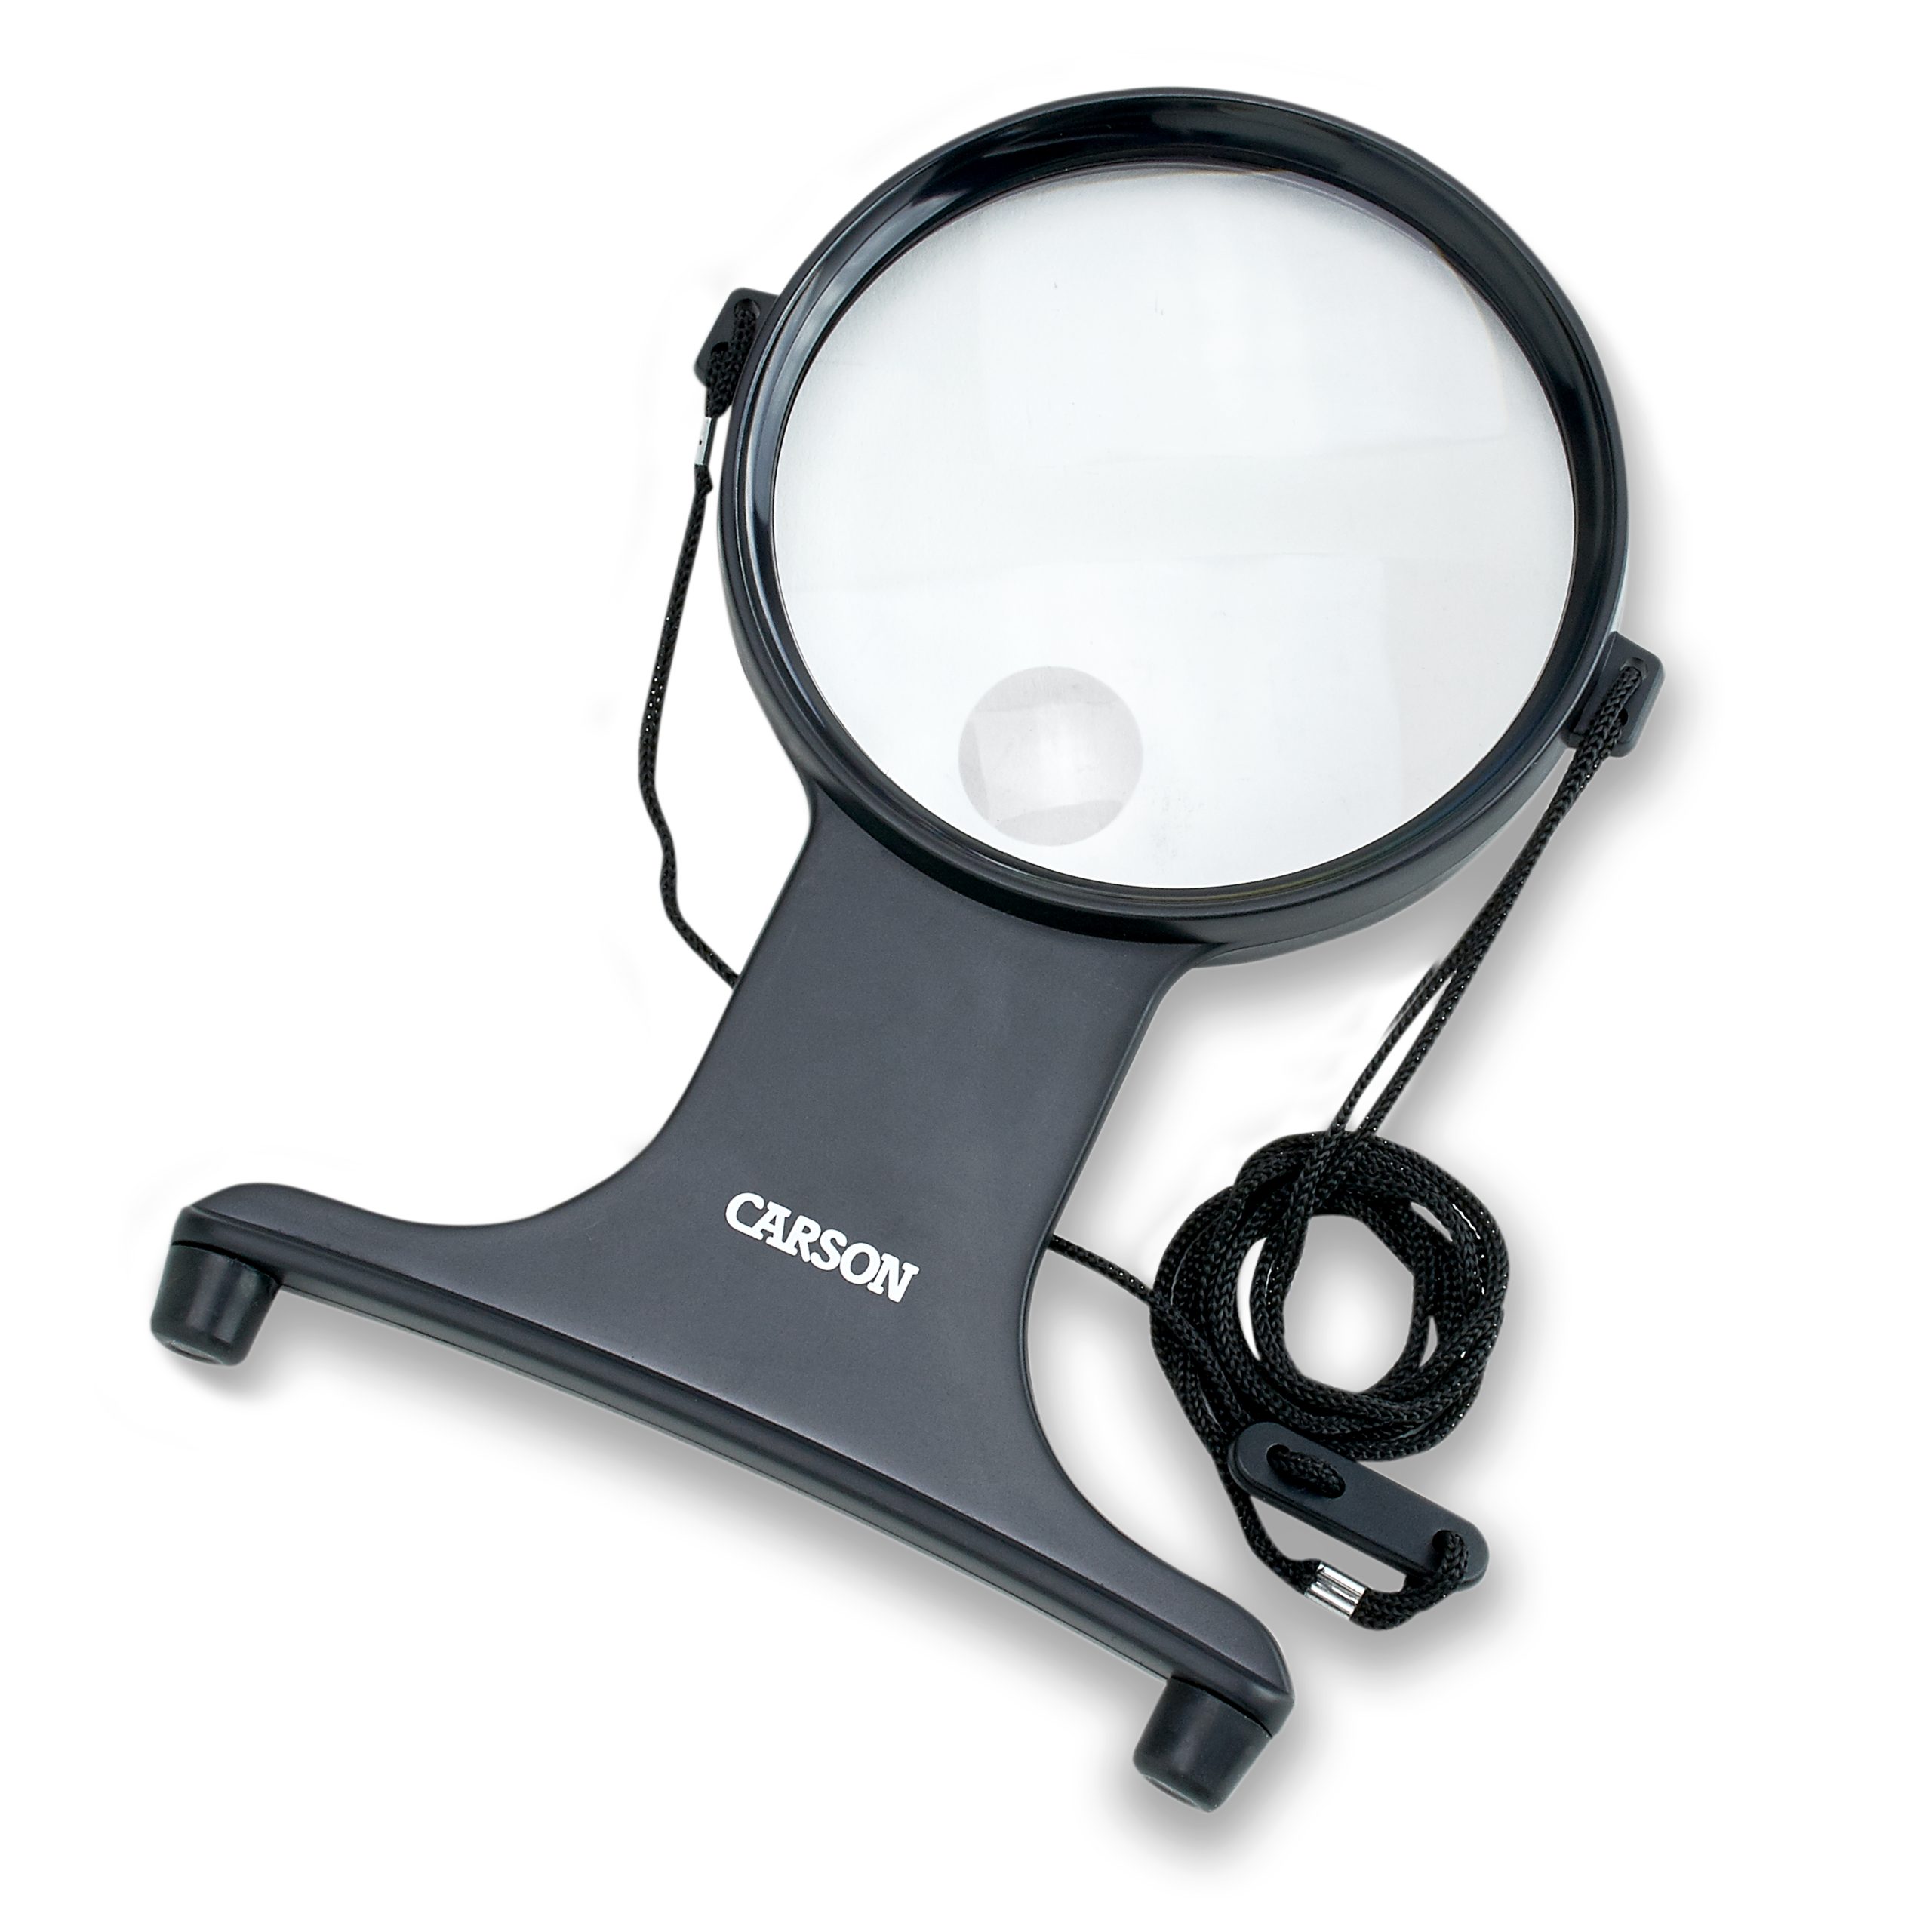 Magnifying Glass Hands Free LED Illuminated Magnifier for Reading Crafts  25X 10X